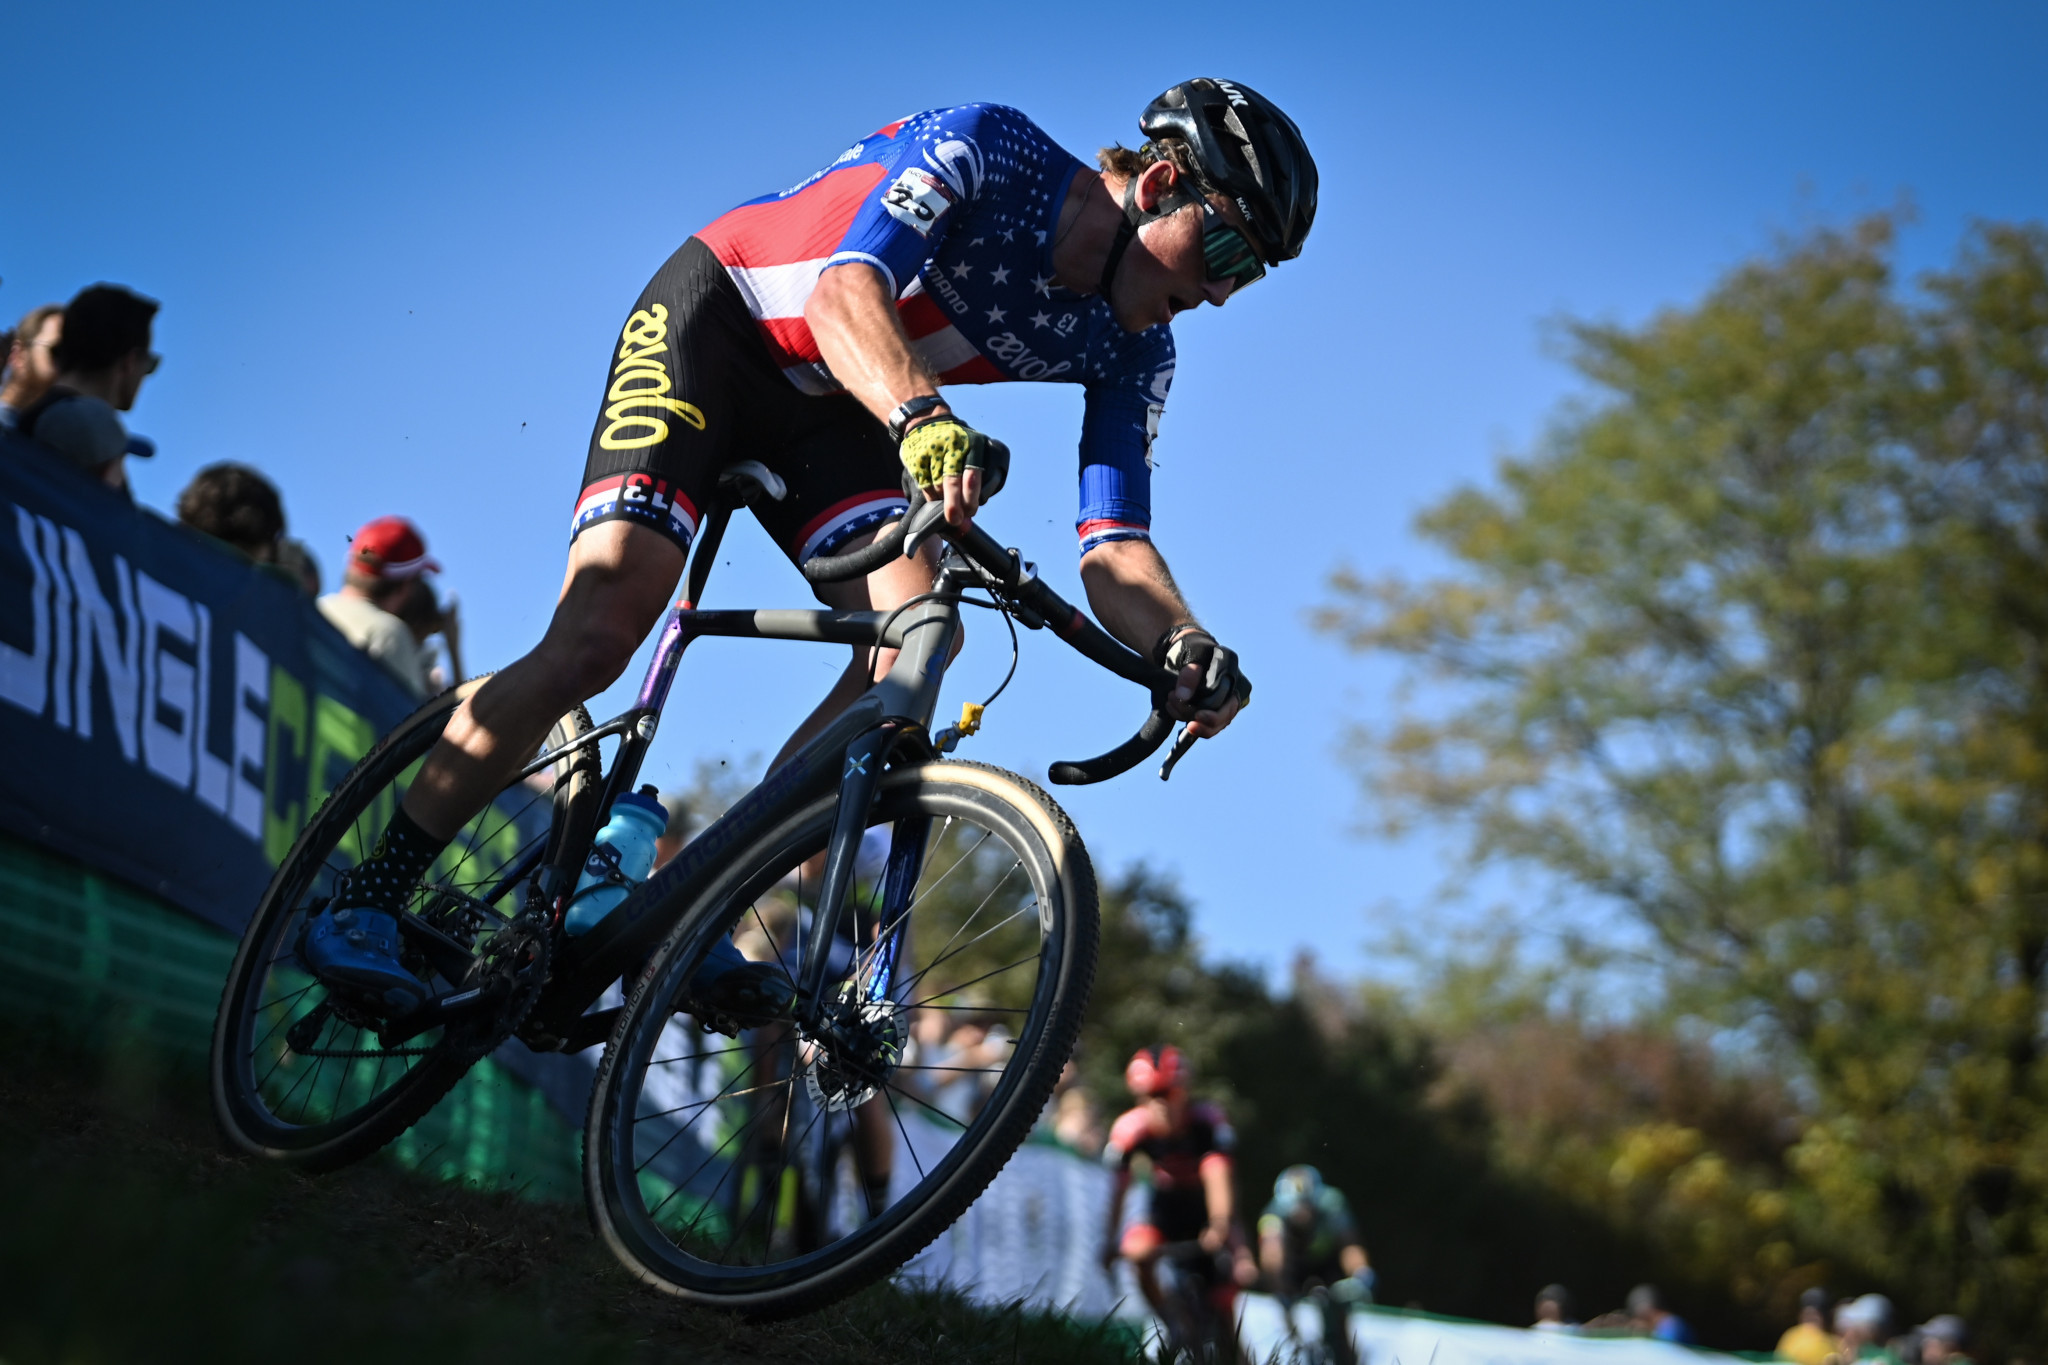 Kerry Werner will be hoping to retain the men's title at the Pan American Cyclo-cross Championships ©Getty Images